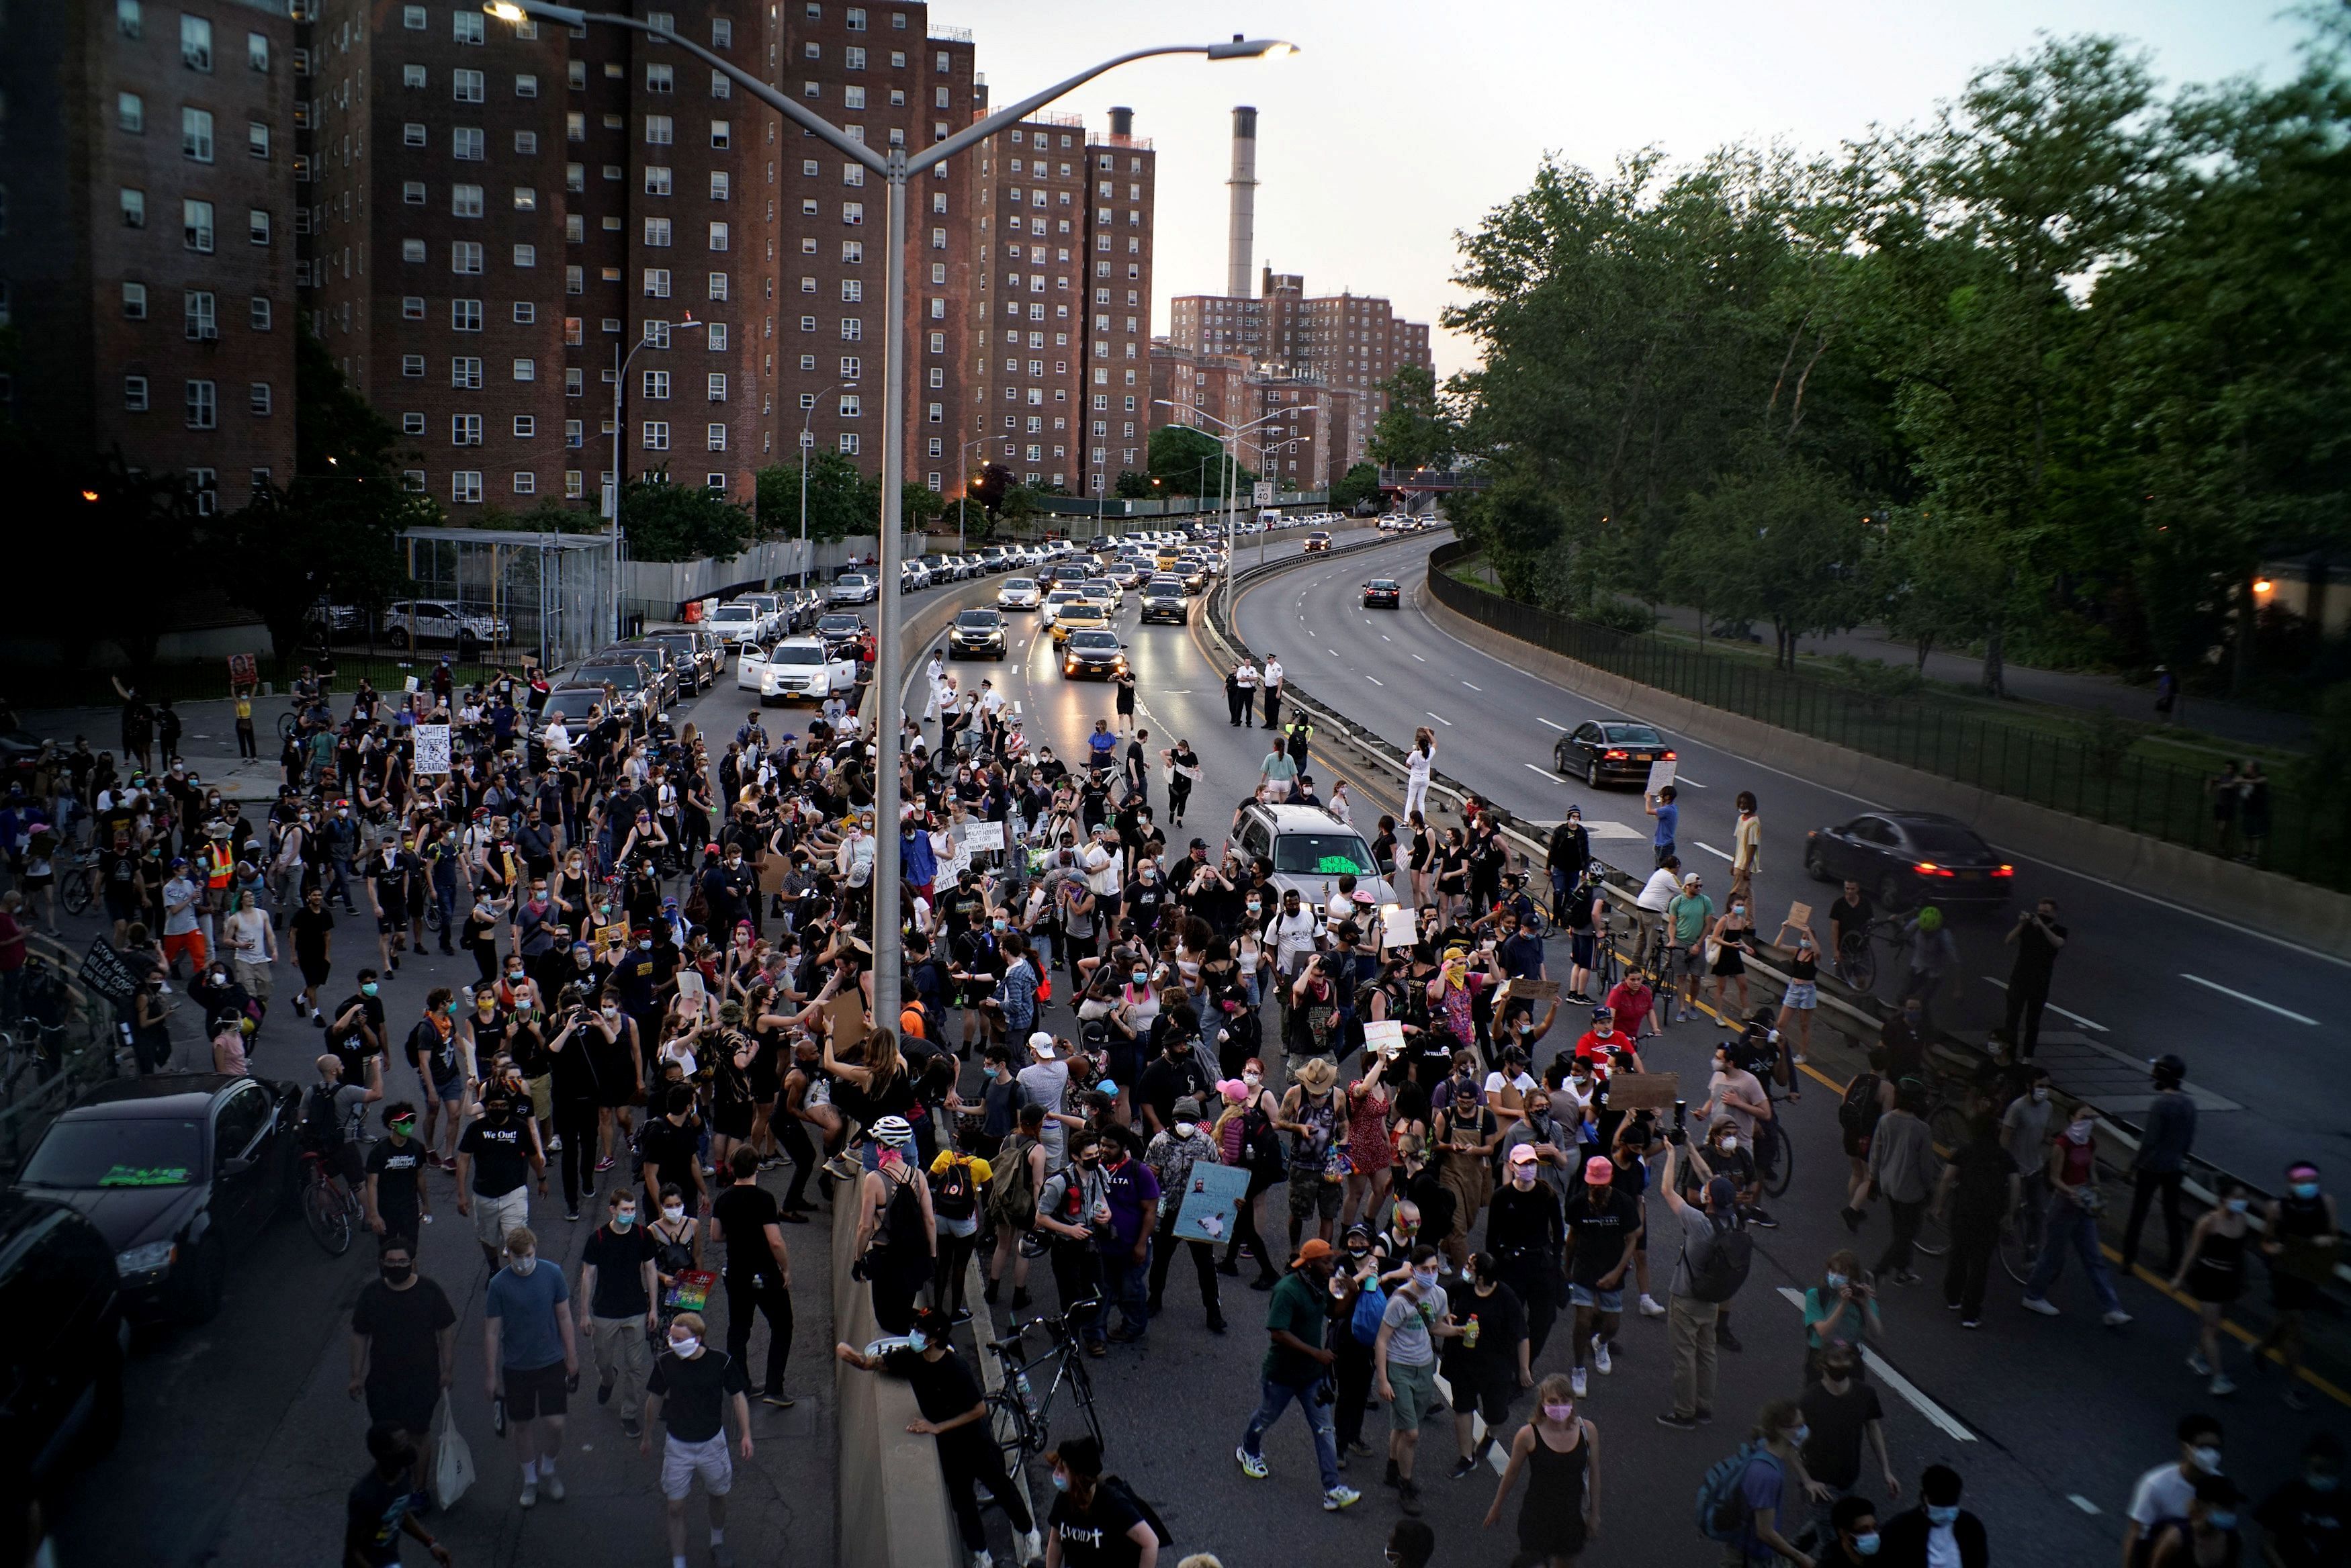 Mayor Bill de Blasio has insisted the curfew will remain in place throughout the weekend. Credit: Reuters Photo